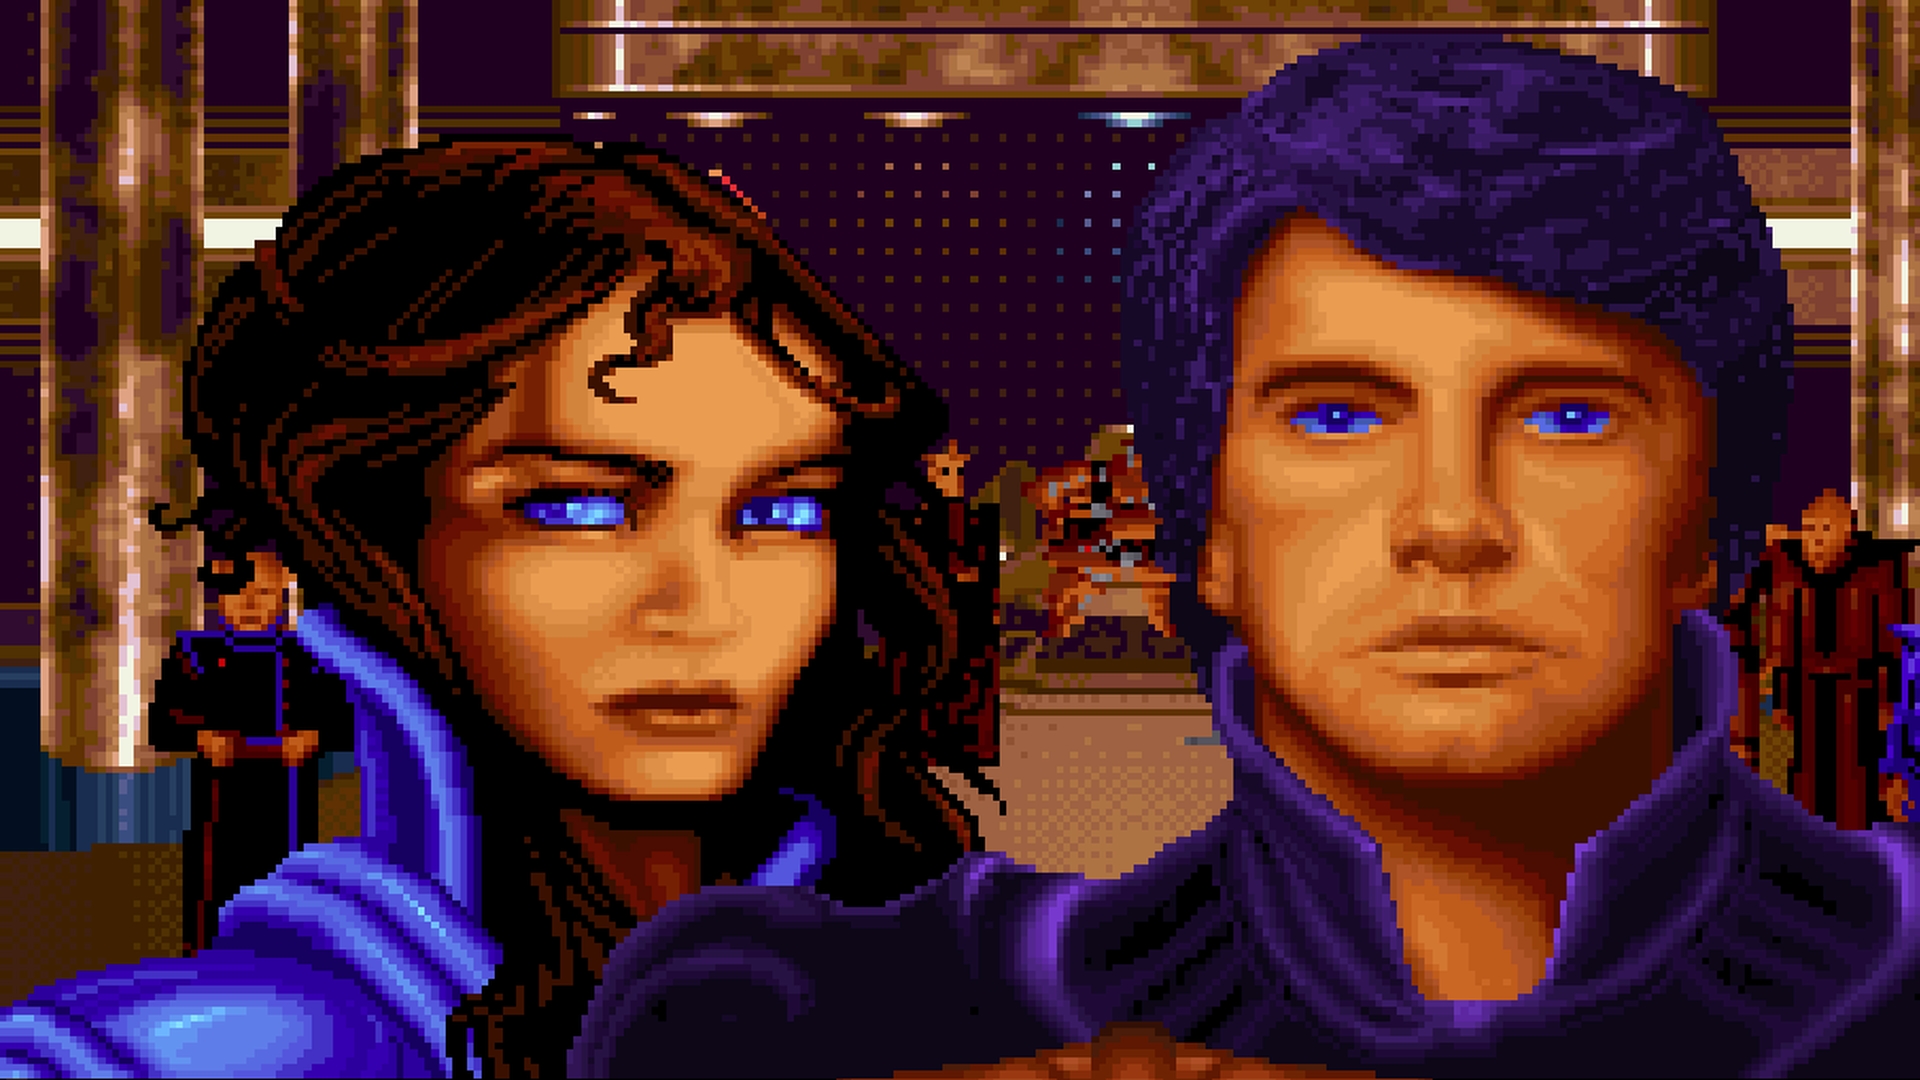  It's hard not to feel sorry for the overshadowed 1992 Dune game 